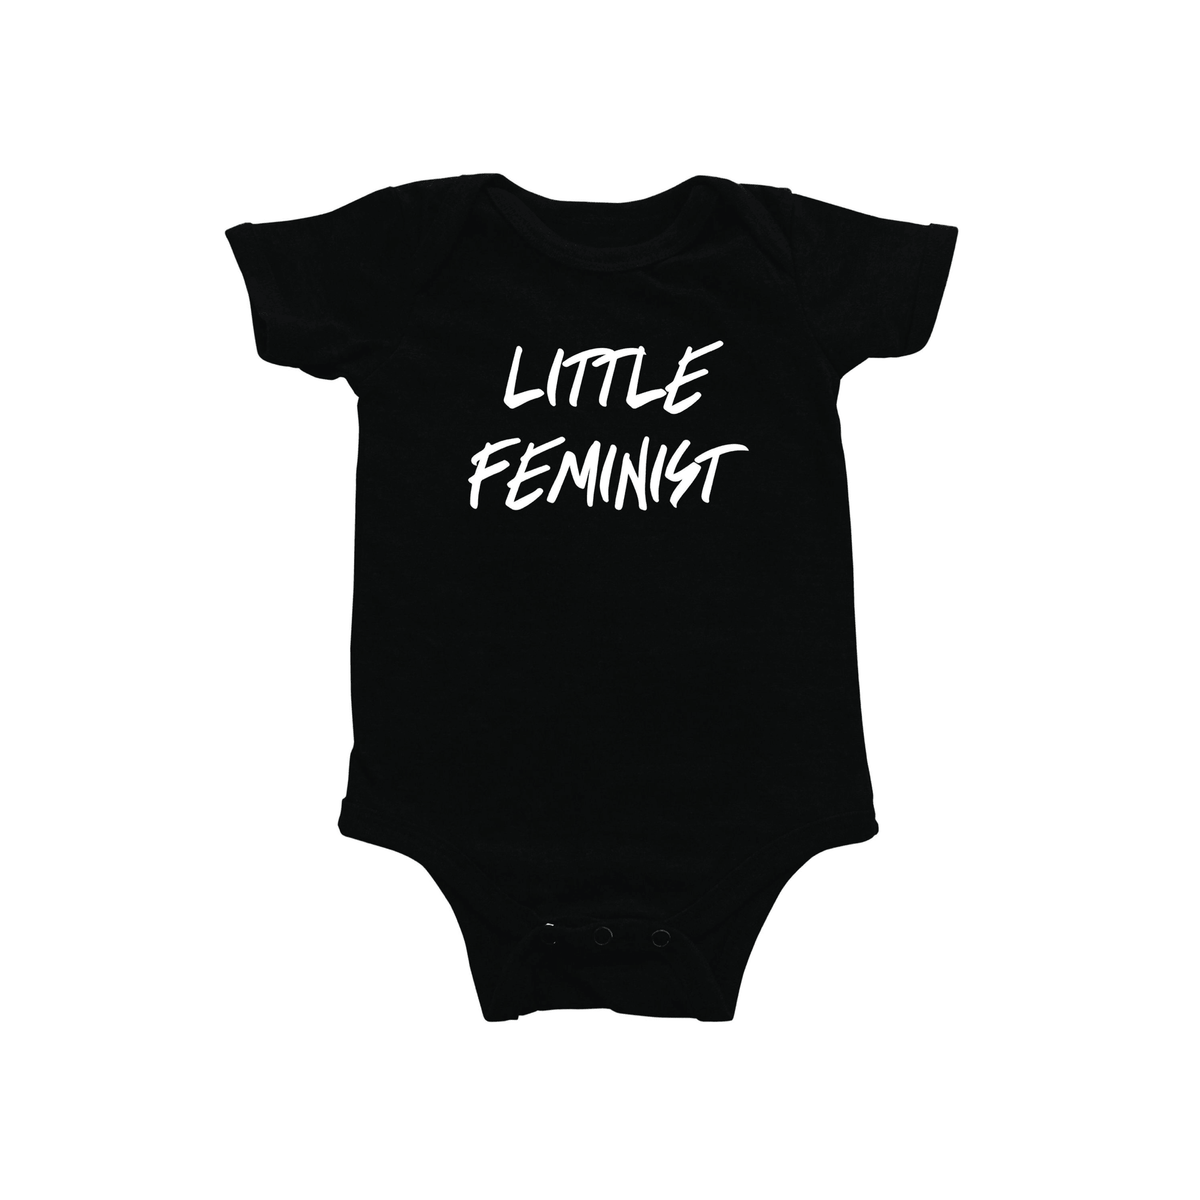 Future Feminist Baby Bodysuit, Women's Rights Advocate Baby, Baby Shower  Gift, Christmas Gift, New Mom Gift, Infant Shirt, Cute Simple Shirt 